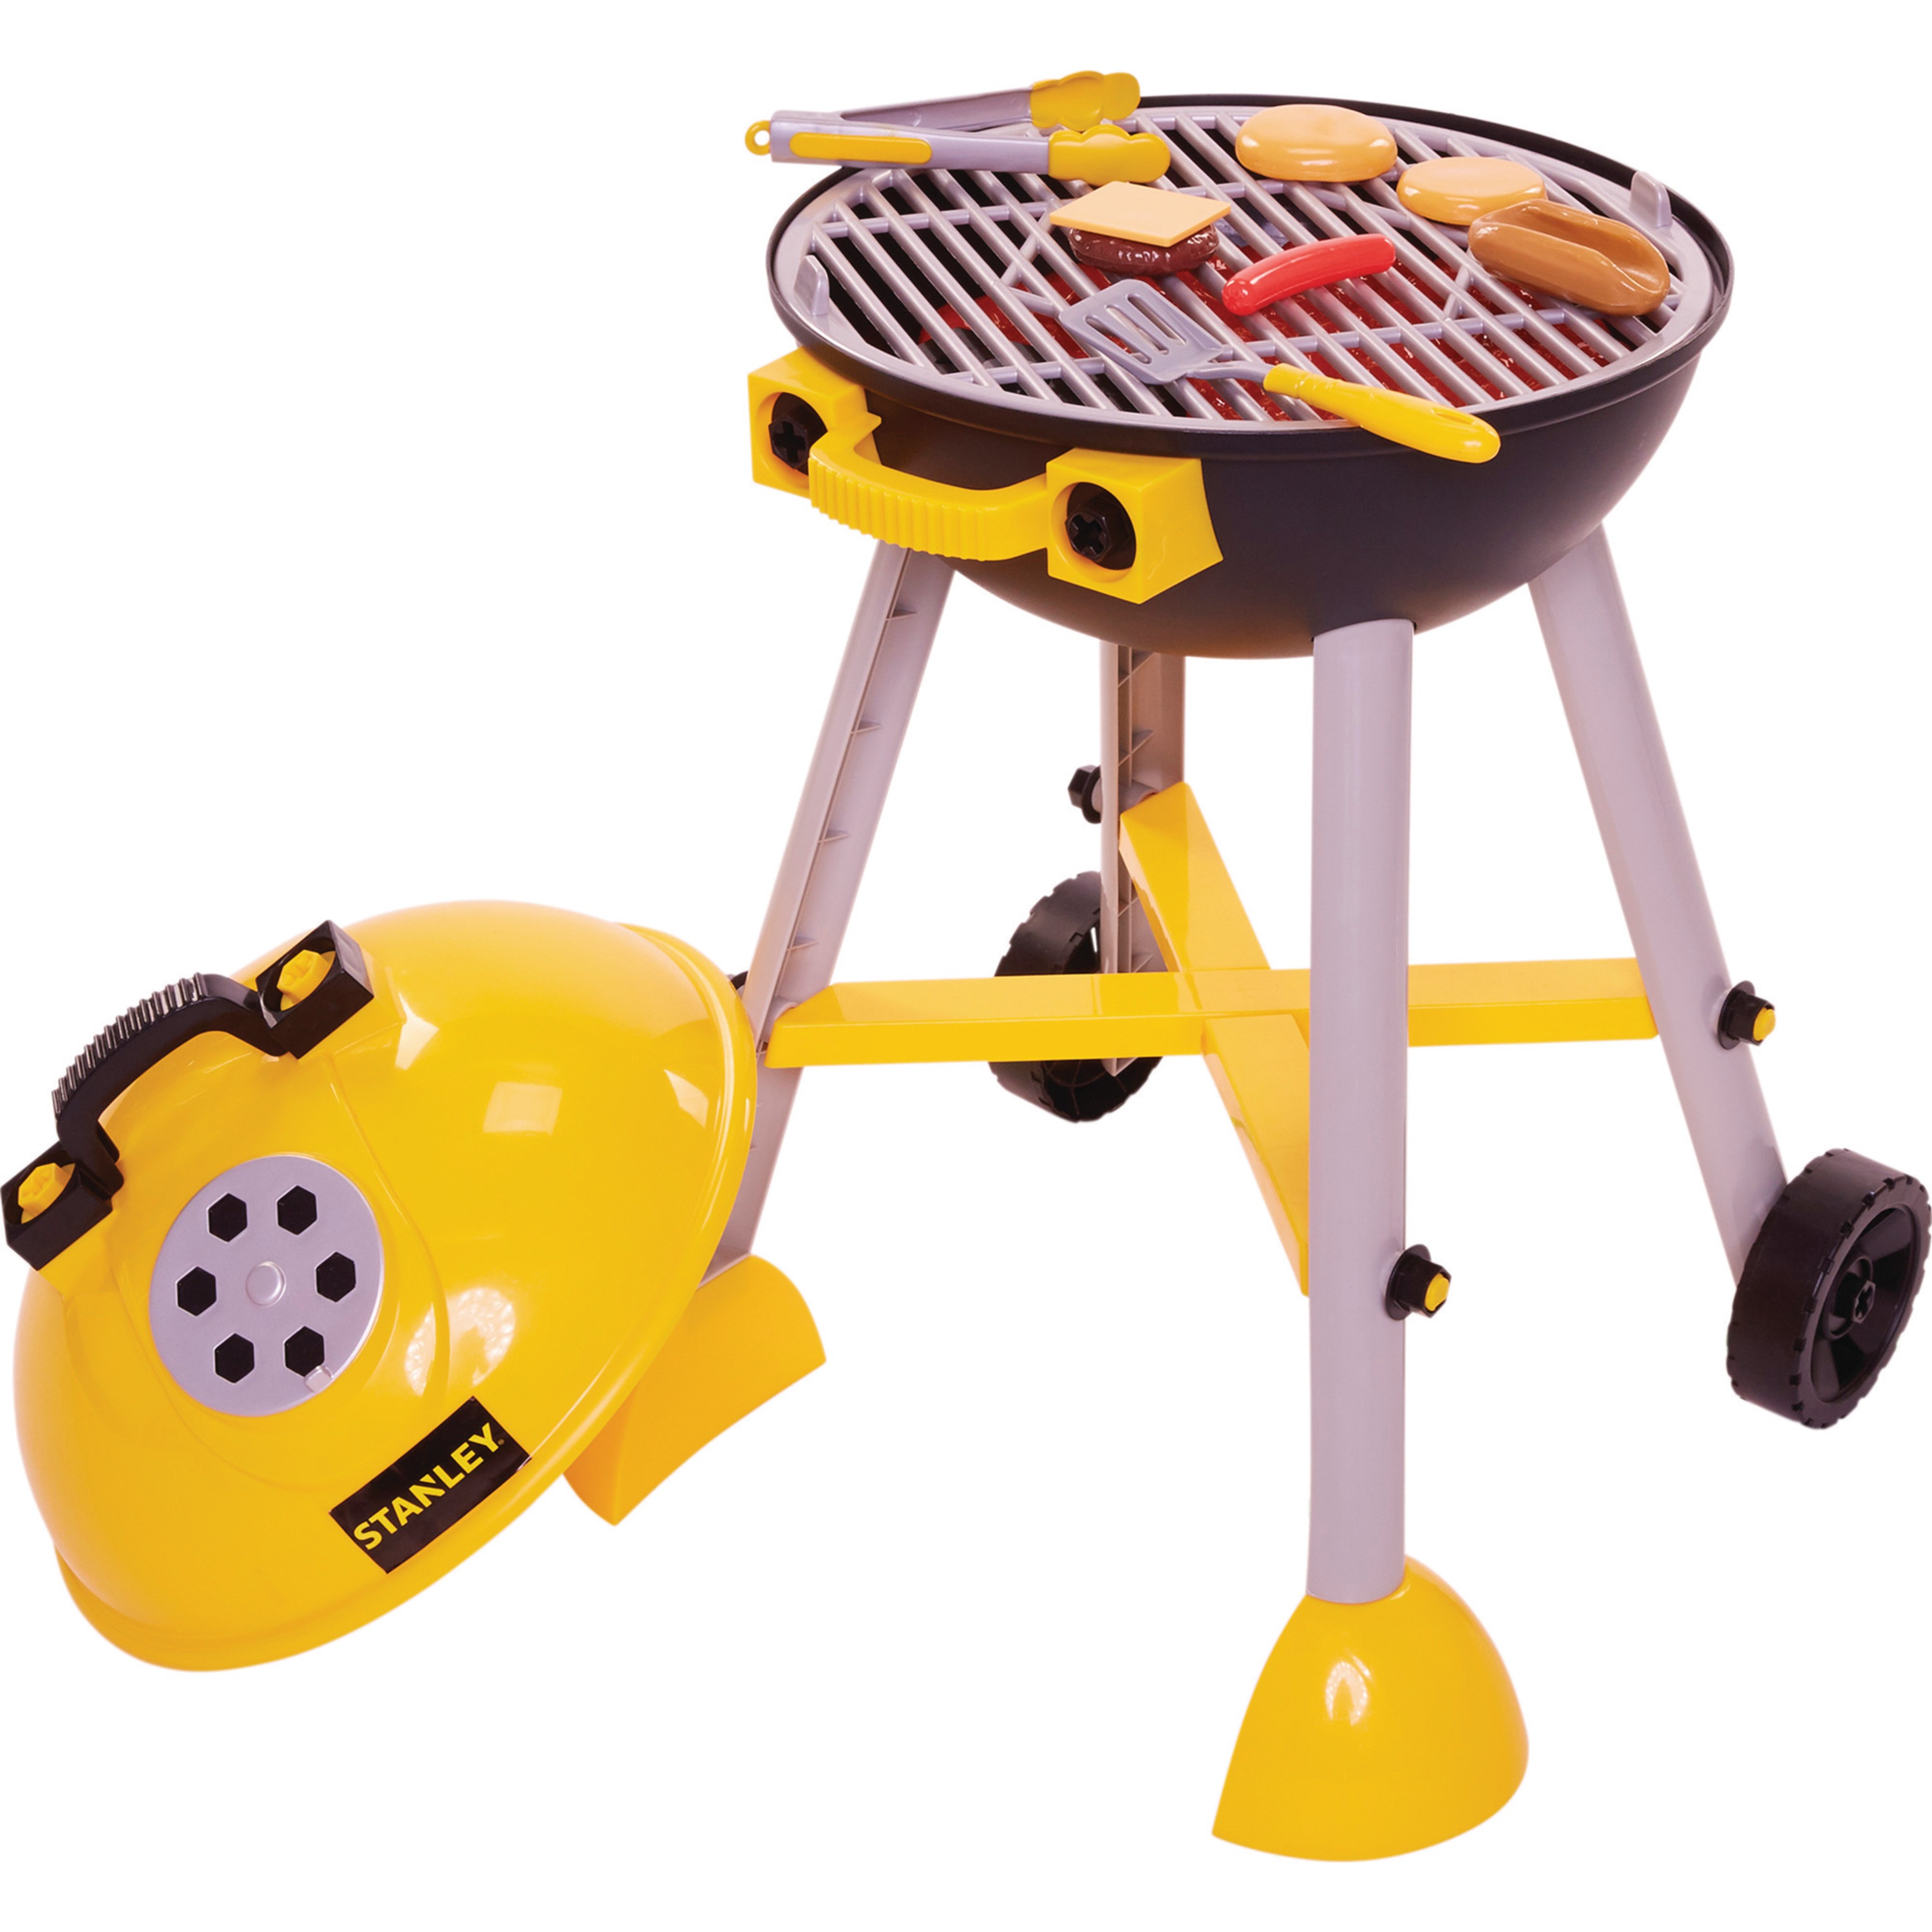 Stanley Tools - STANLEY Jr Toy BBQ Grill - 57650